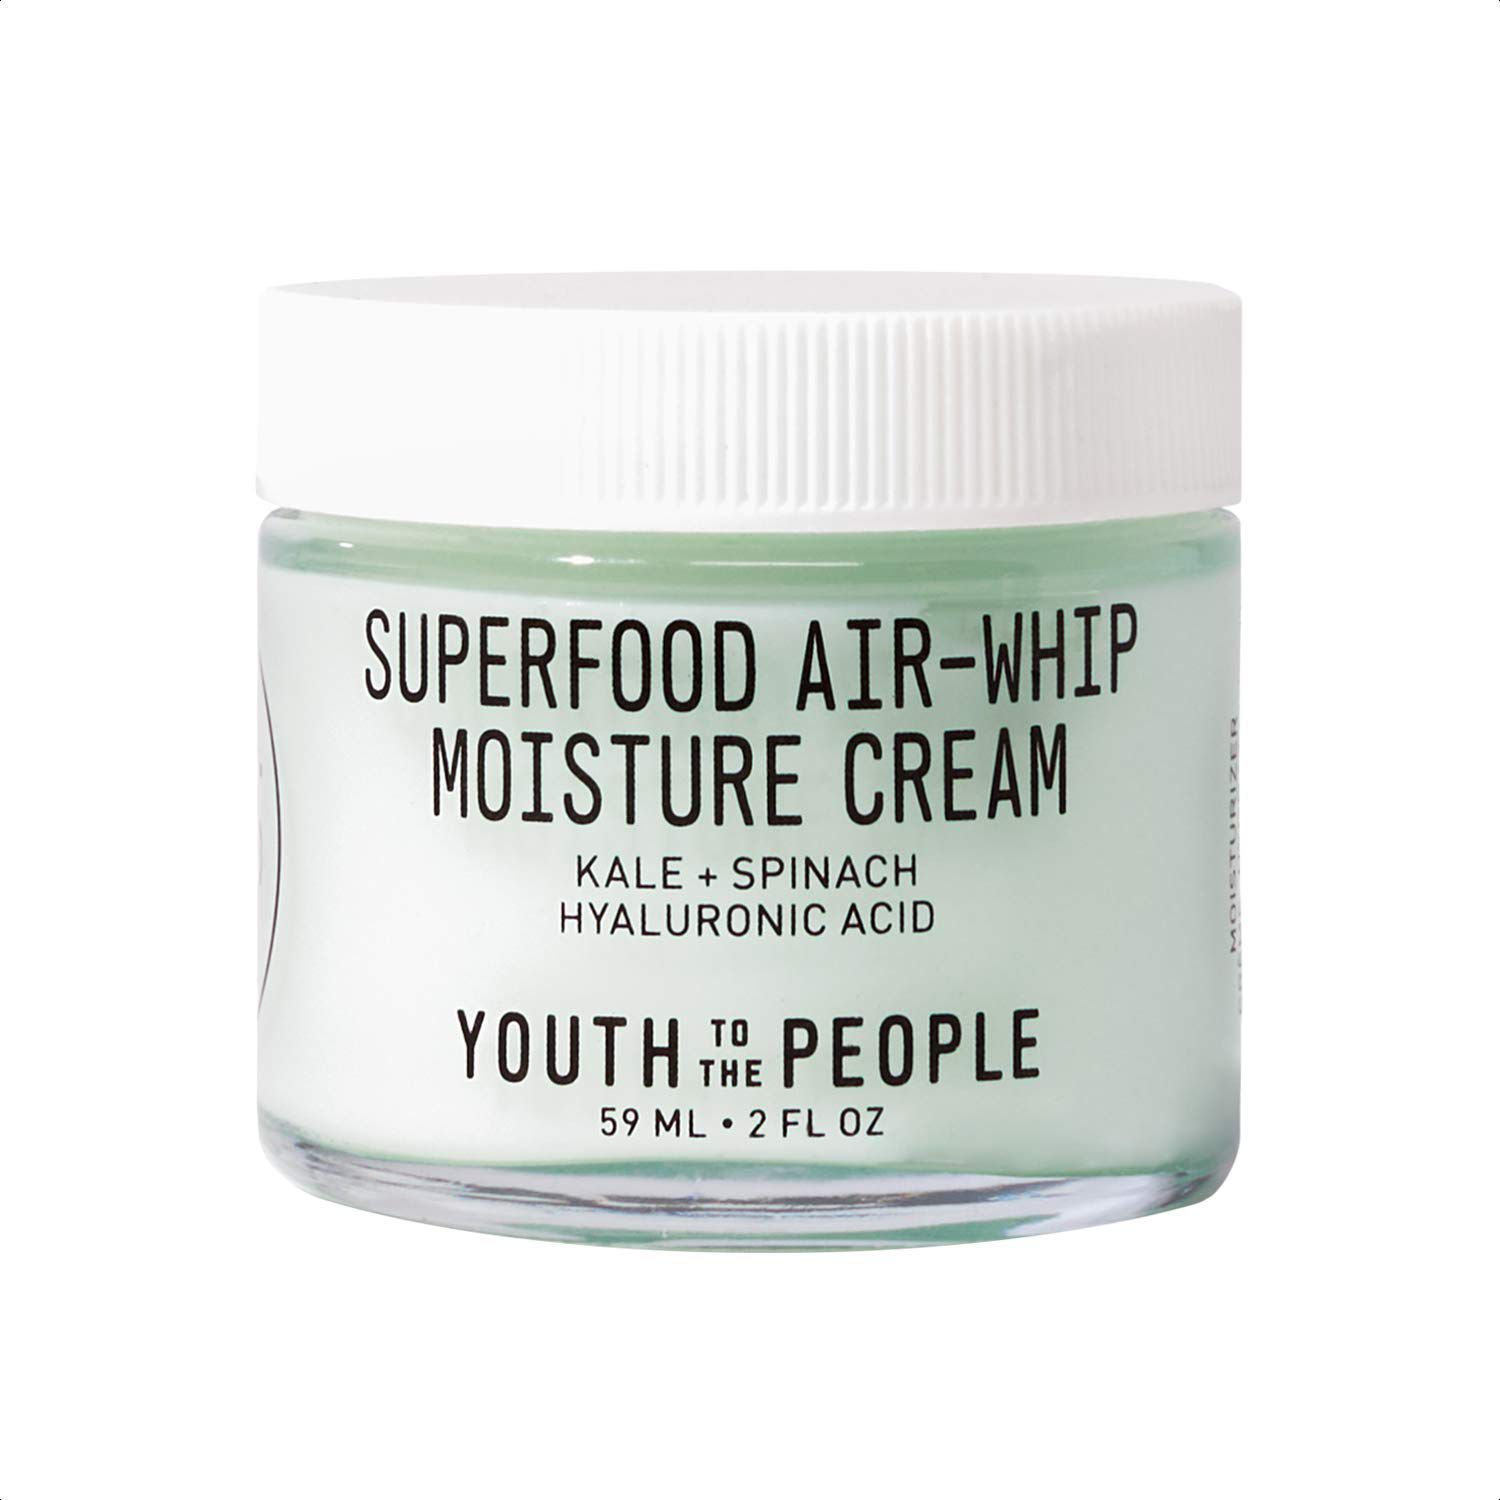 Youth to the People Superfood Air-Whip Moisturizer